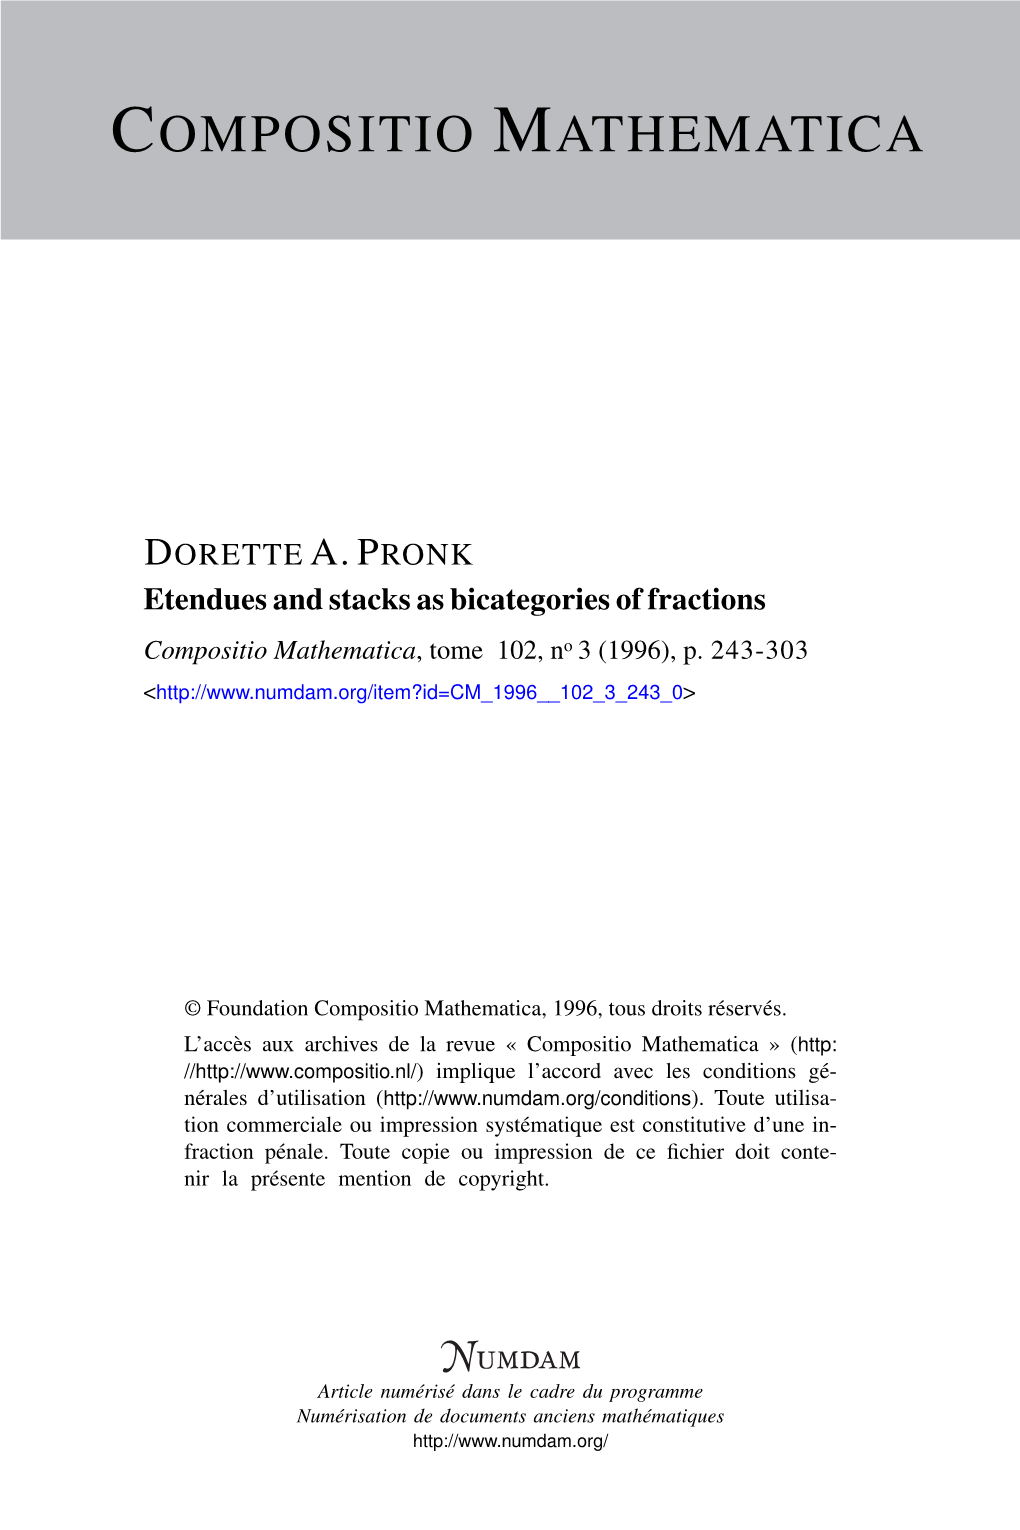 Etendues and Stacks As Bicategories of Fractions Compositio Mathematica, Tome 102, No 3 (1996), P